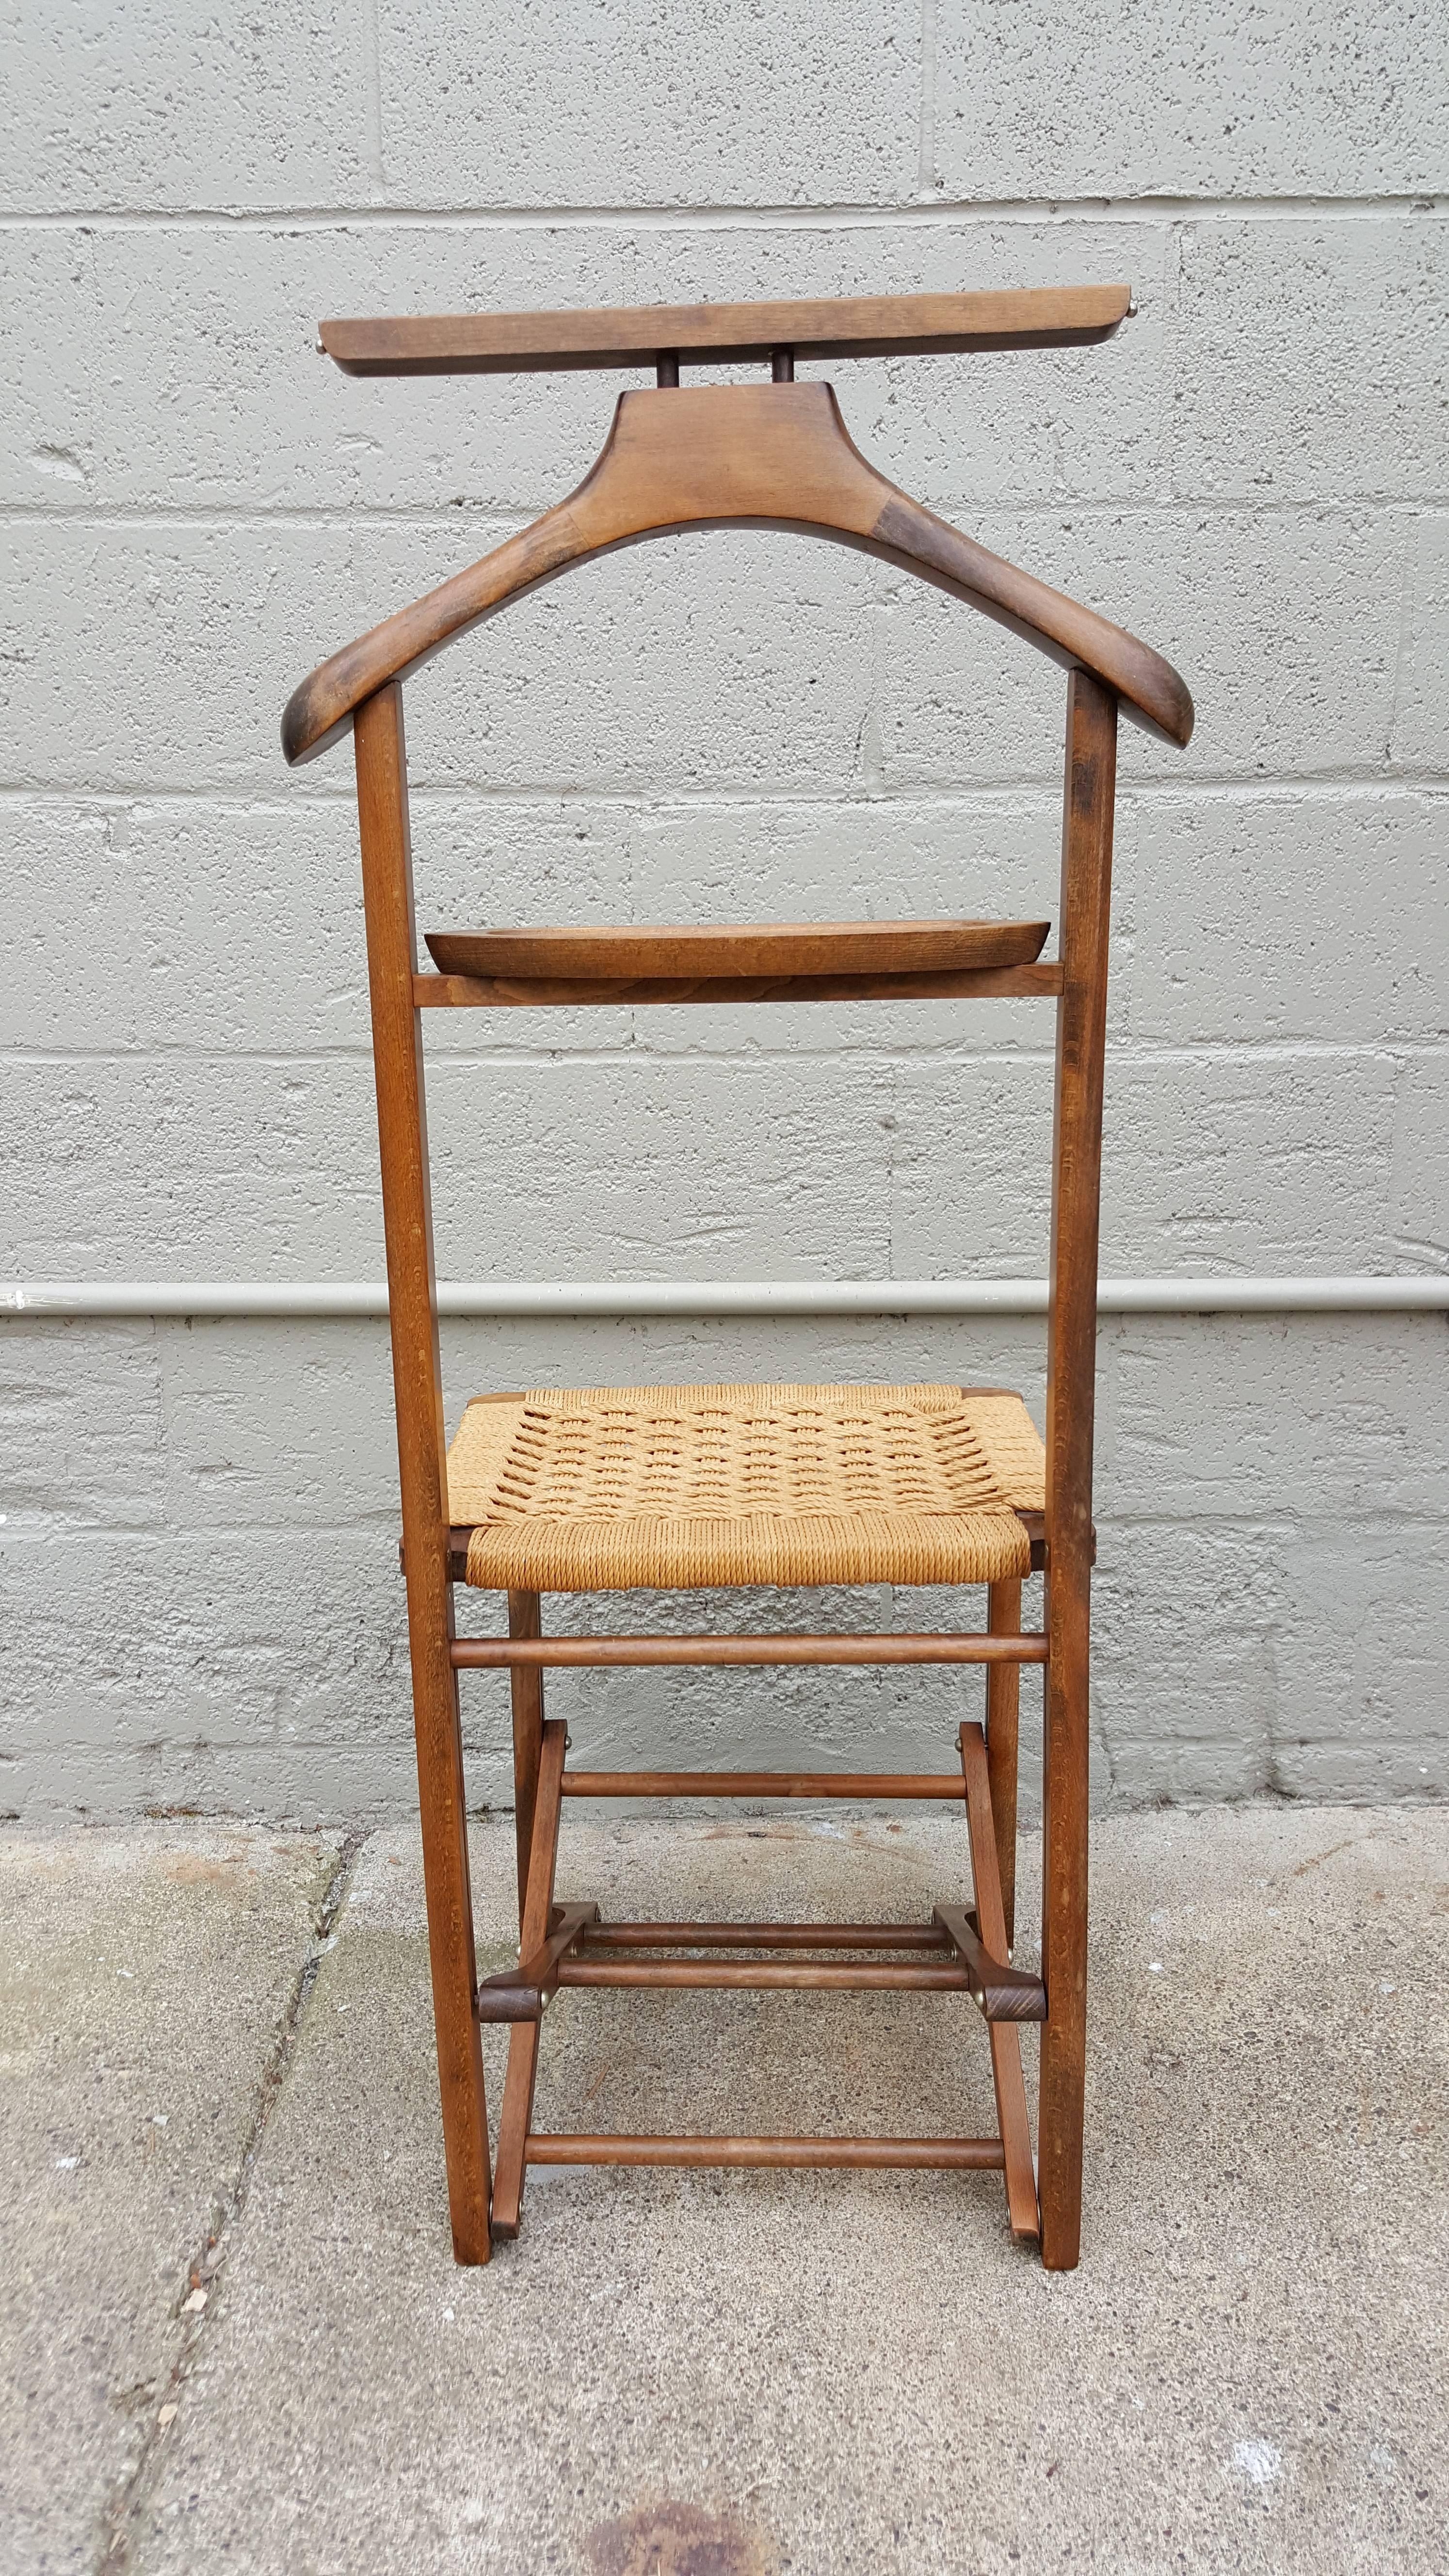 A beechwood and paper cord Italian gentleman's valet chair by Fratelli Reguitti, circa 1960. Folding seat option creates easy storage if needed. Excellent original condition and finish. Seat height 18